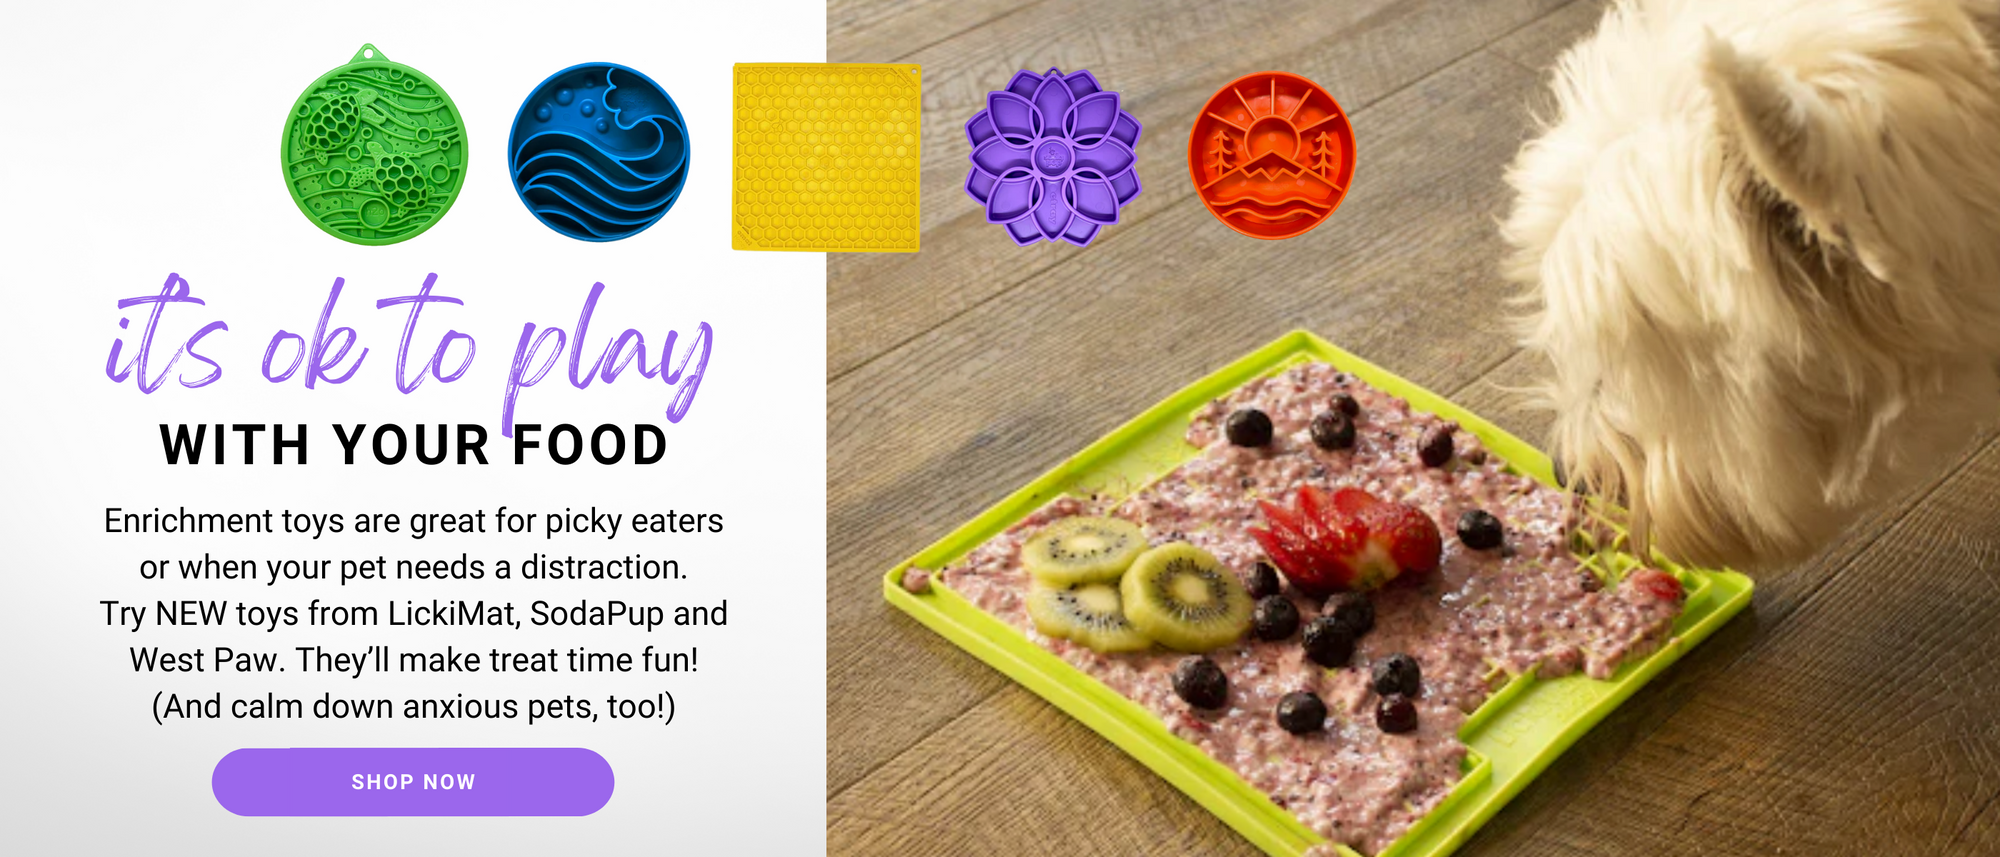 Enrichment toys for picky eaters, calming anxious pets or mealtime fun! Shop the collection now!